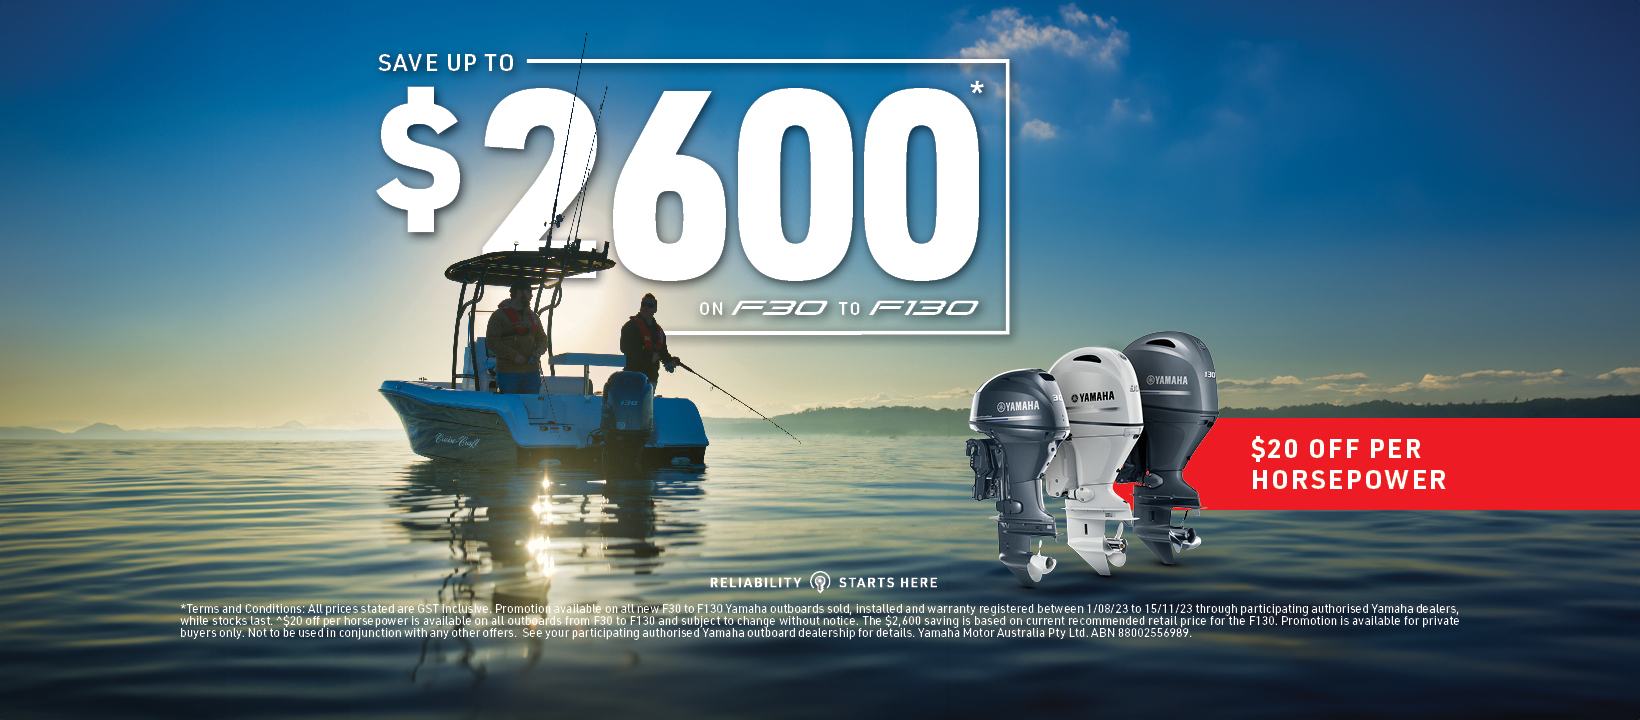 SAVE UP TO $2600 ON YAMAHA F30 TO F130 OUTBOARDS